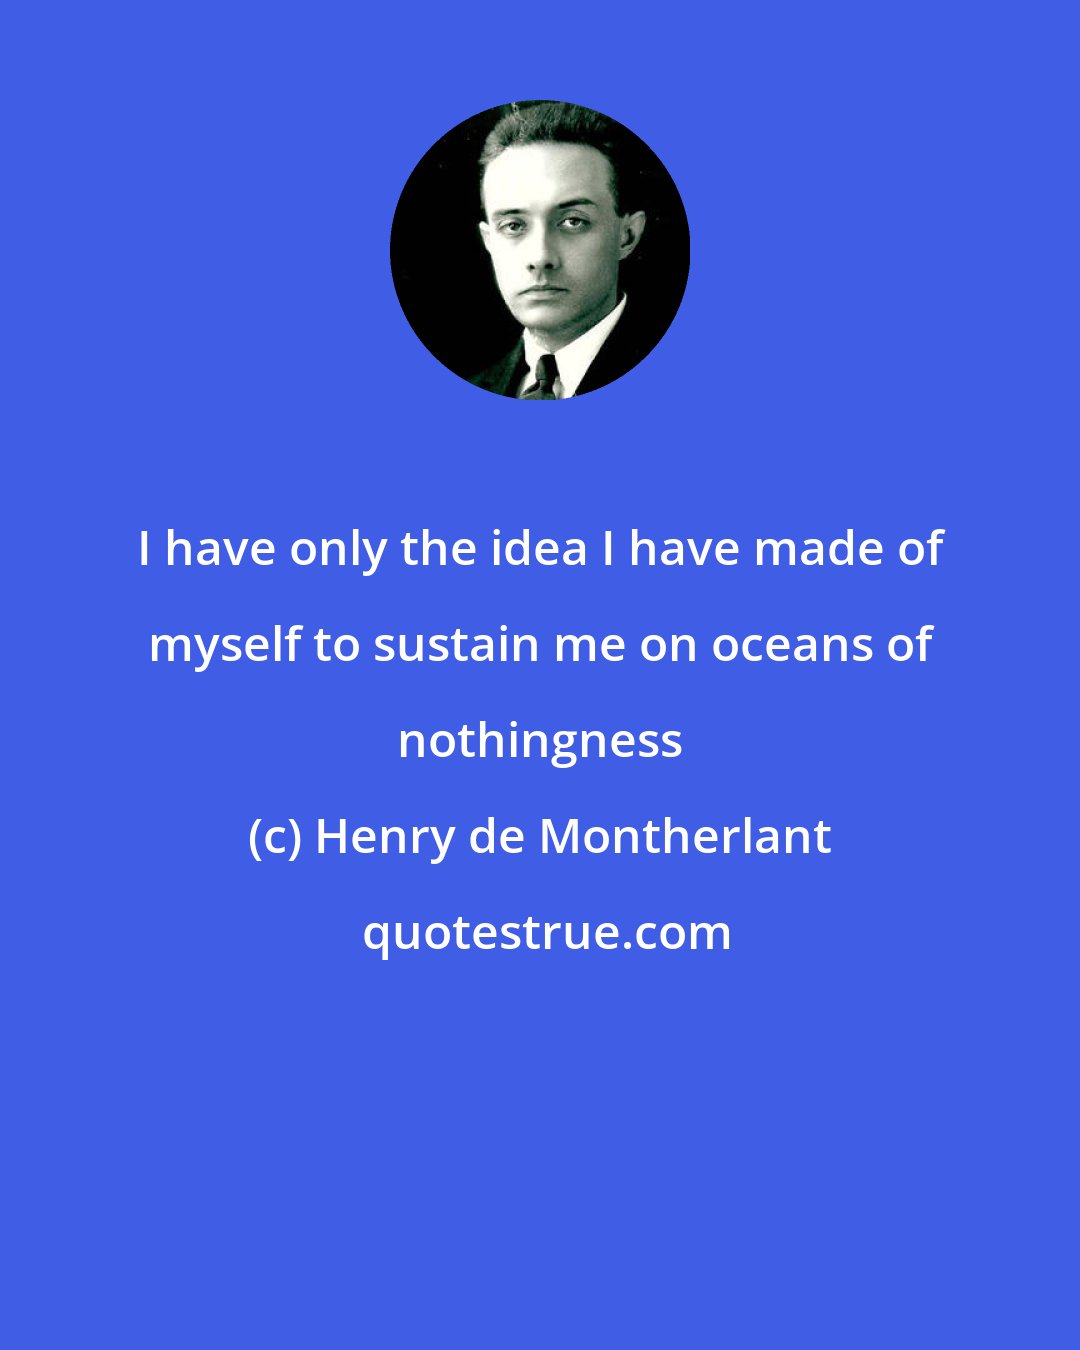 Henry de Montherlant: I have only the idea I have made of myself to sustain me on oceans of nothingness